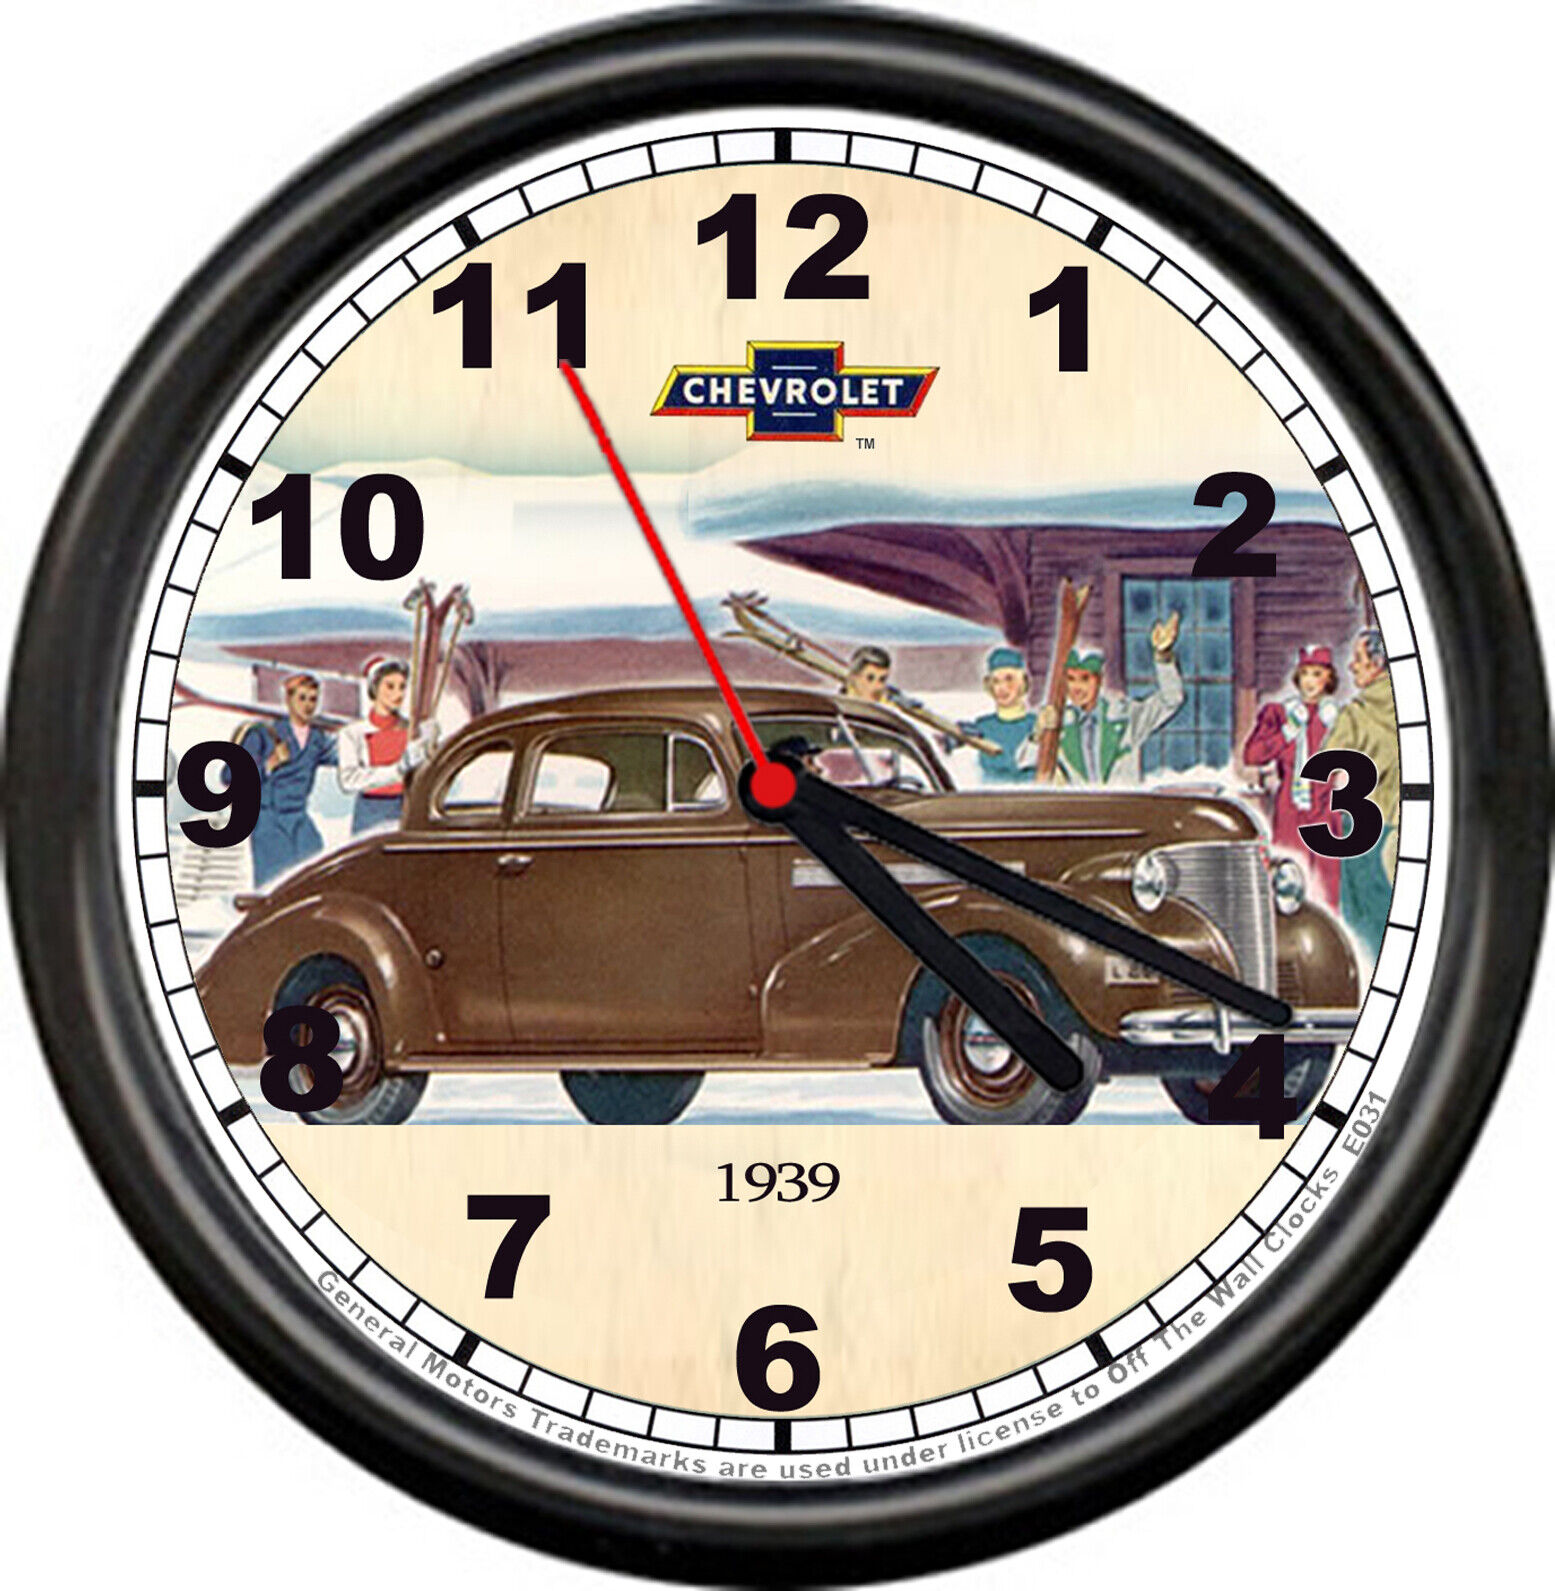 Licensed 1939 Classic Chevy 2 Dr Coupe Chevrolet General Motors Sign Wall Clock